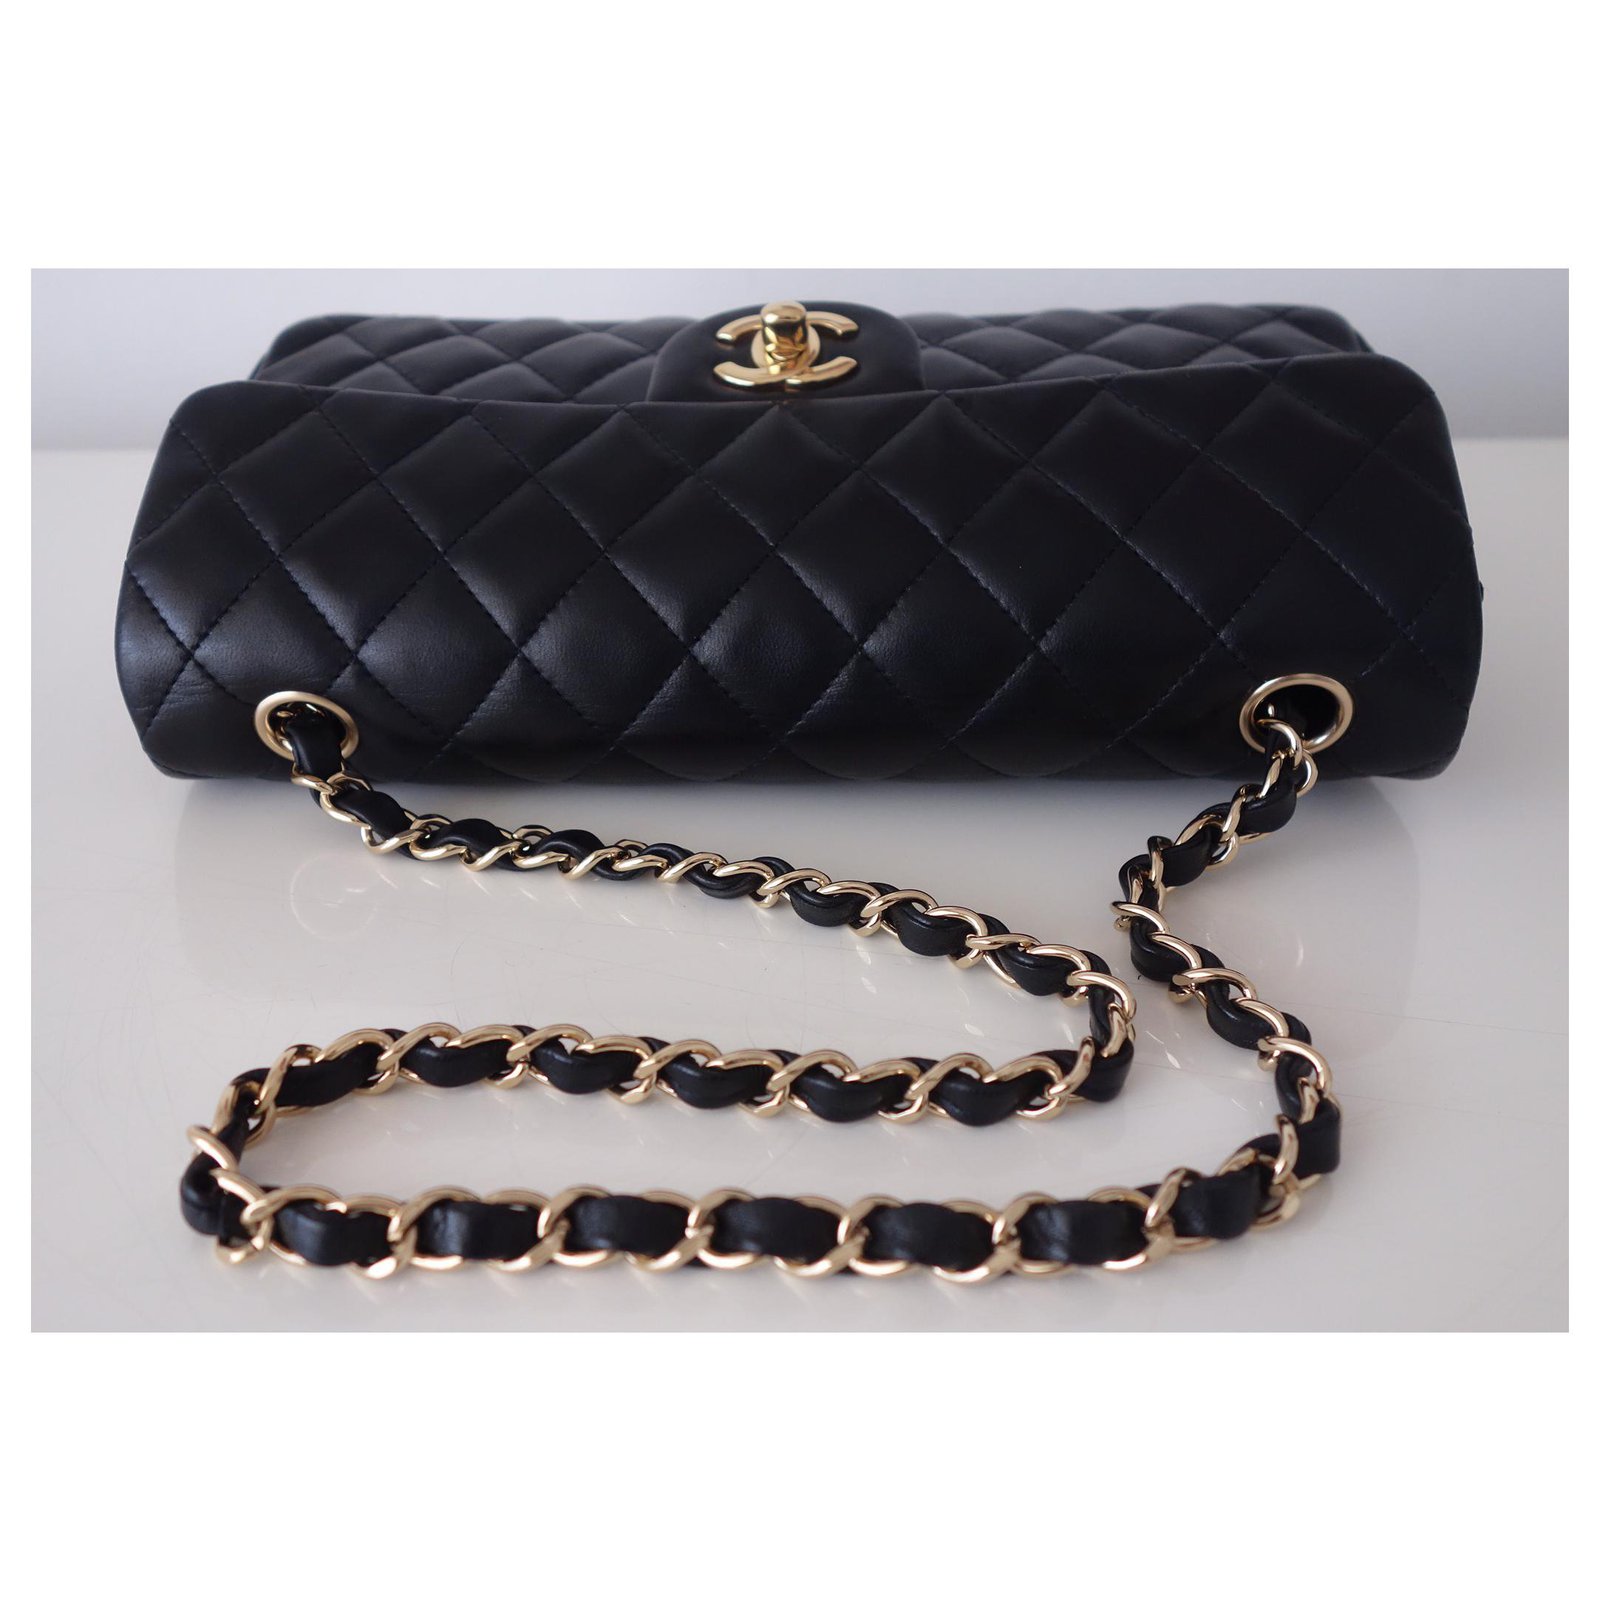 Timeless CHANEL CLASSIC BAGUETTE BAG Black Leather ref.178872